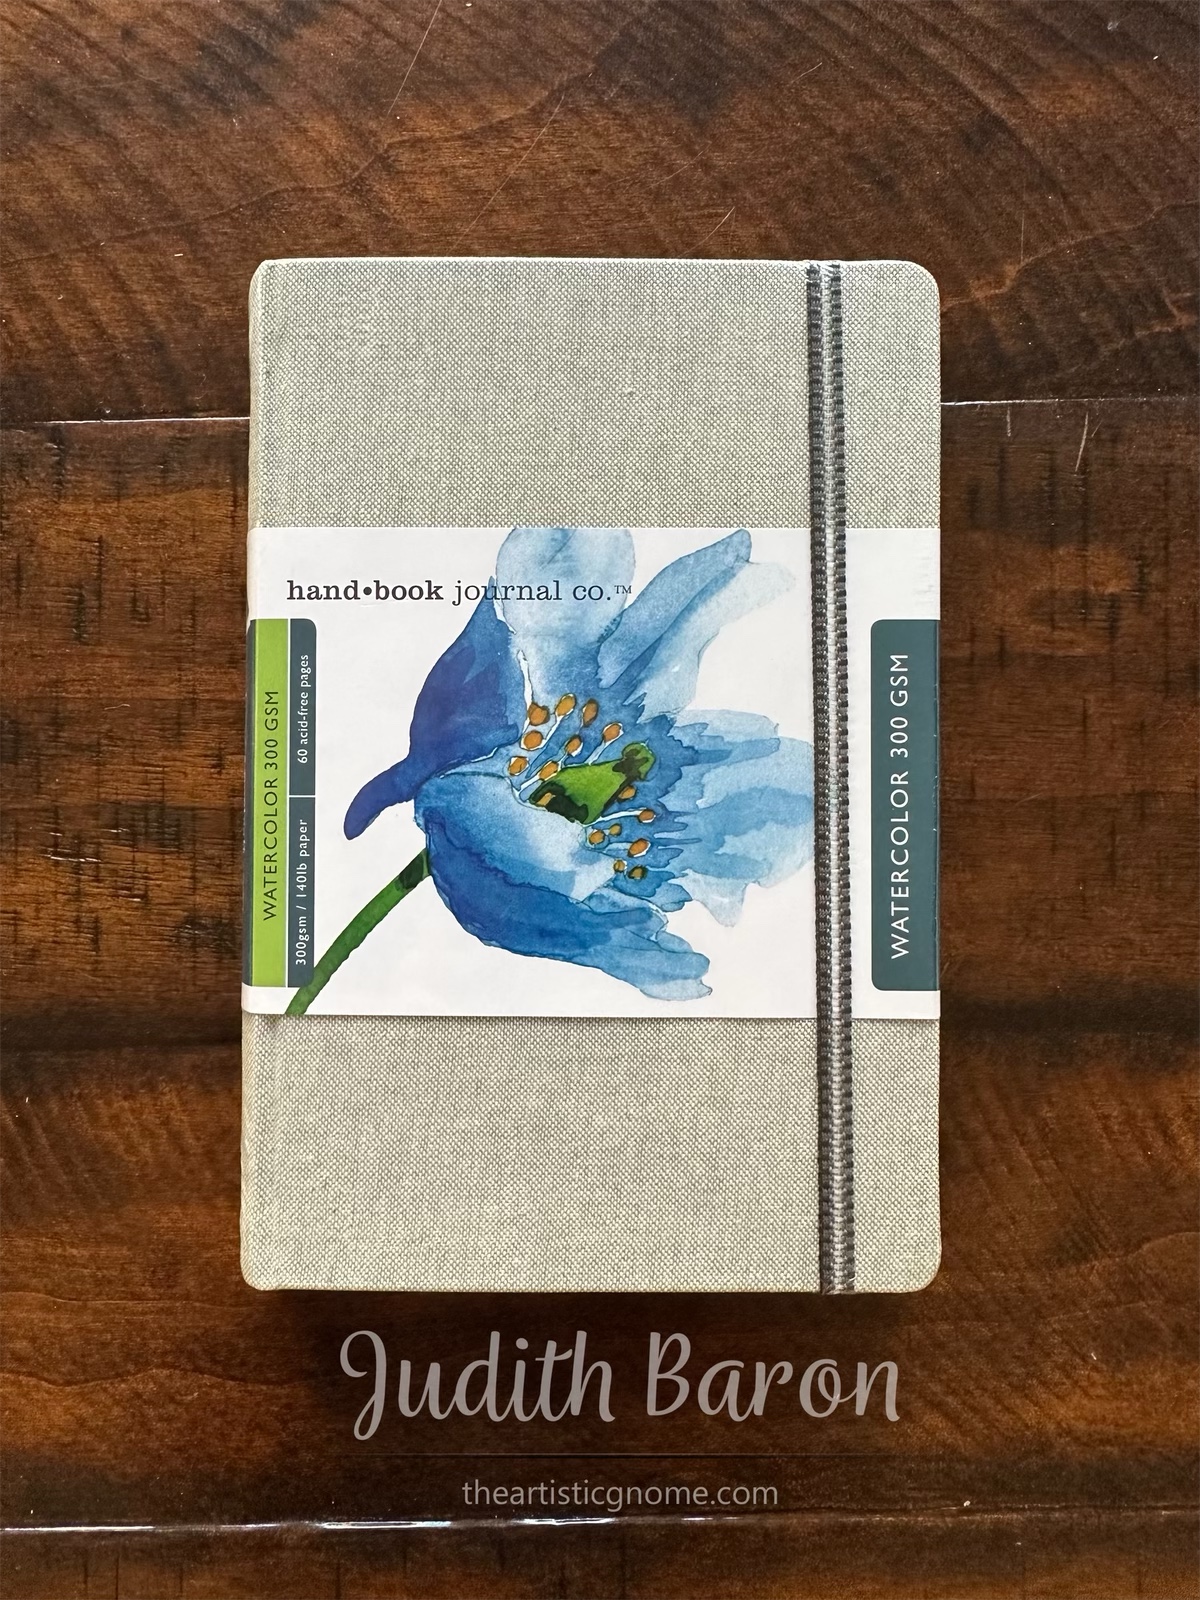 Etchr Review: Perfect Sketchbook, Field Case, Watercolors